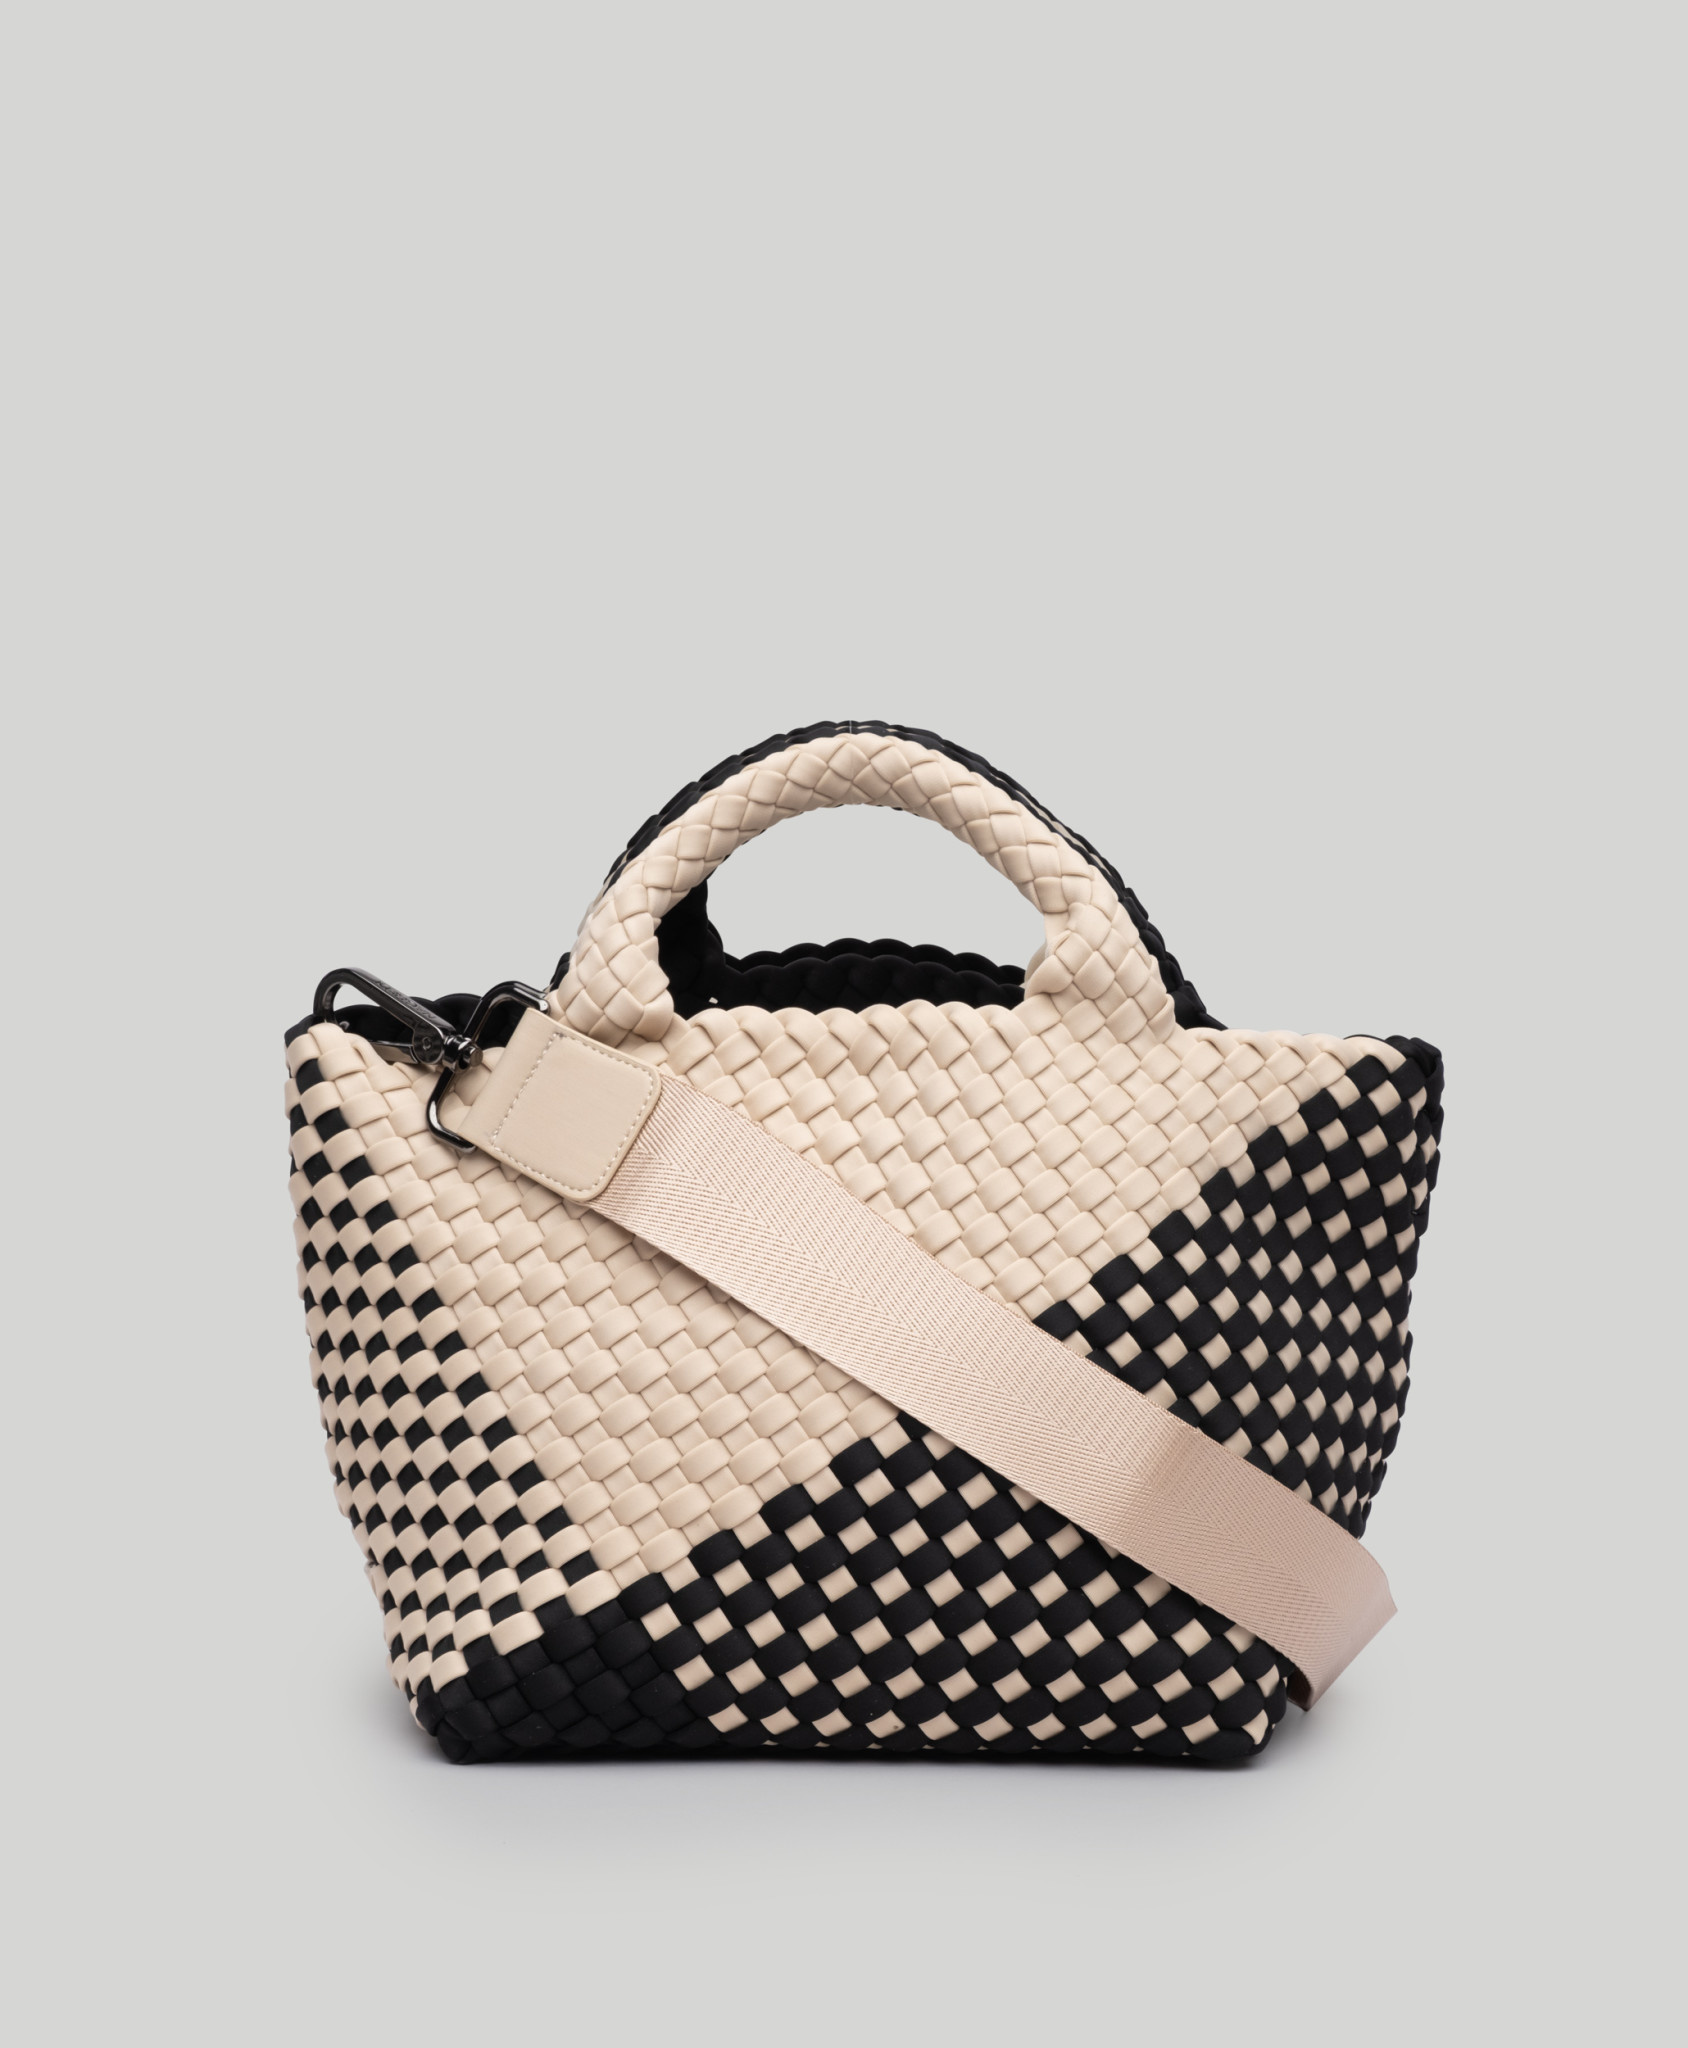  St. Barth's Beach Graphic Tote Bag : Clothing, Shoes